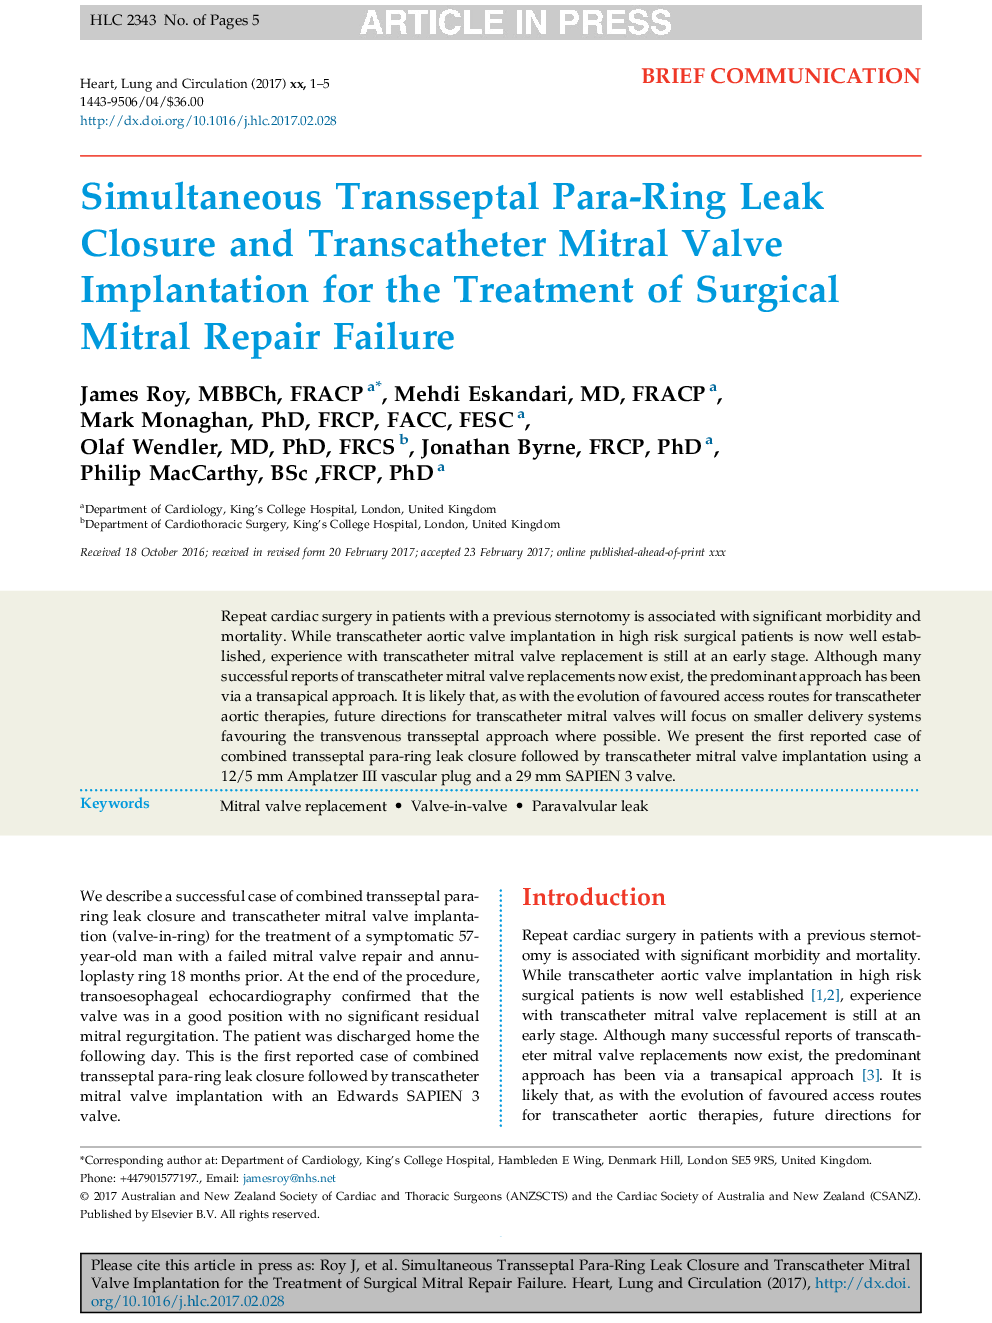 Simultaneous Transseptal Para-Ring Leak Closure and Transcatheter Mitral Valve Implantation for the Treatment of Surgical Mitral Repair Failure